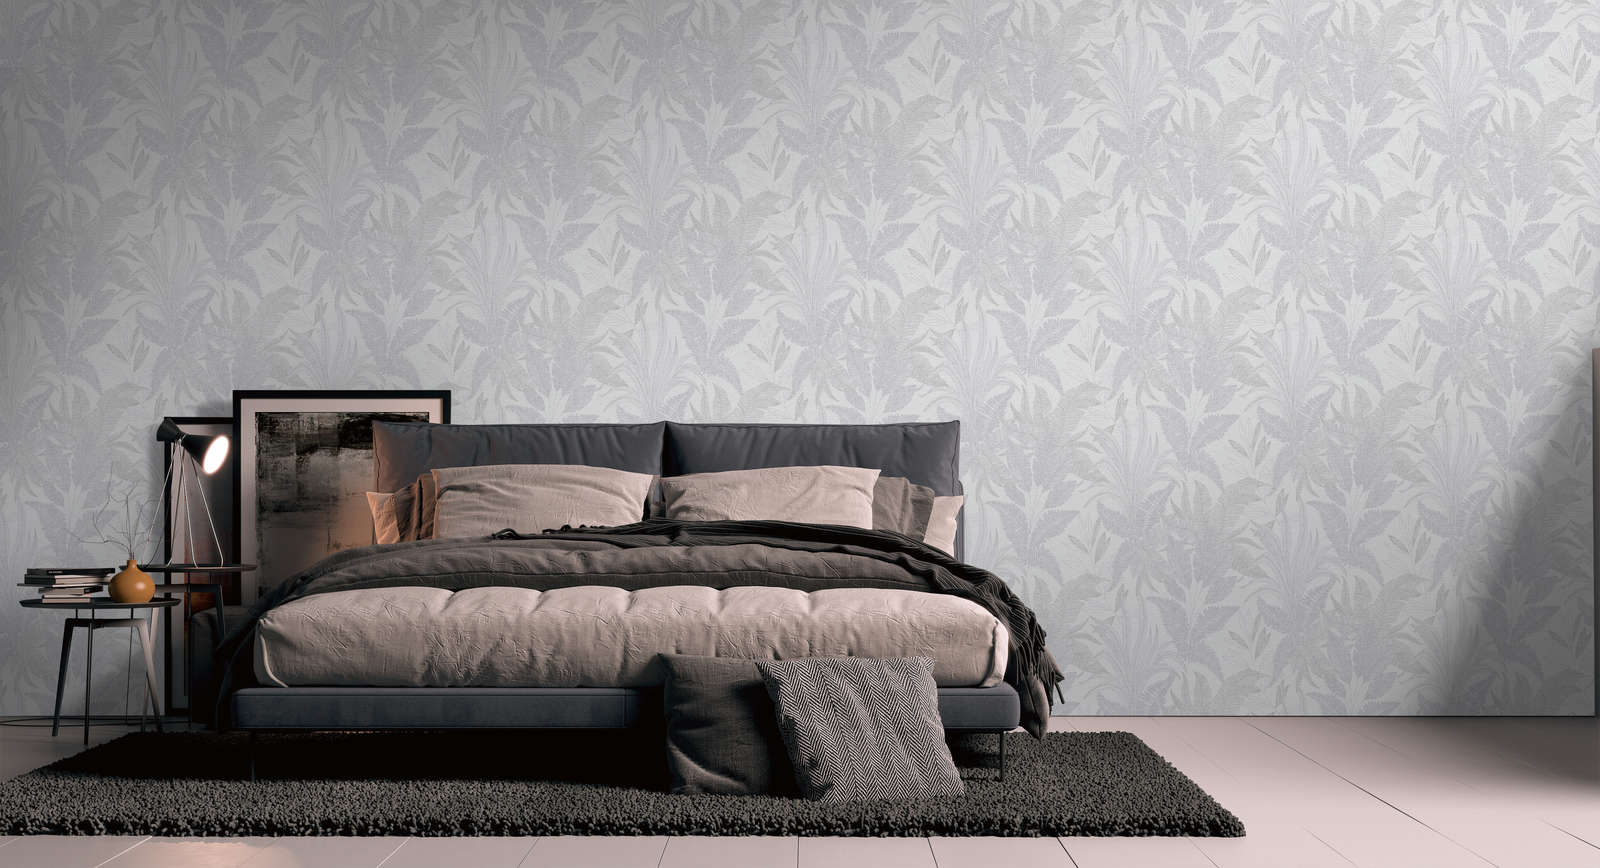             Non-woven wallpaper with jungle leaves - lightly textured pattern - grey, cream, gold
        